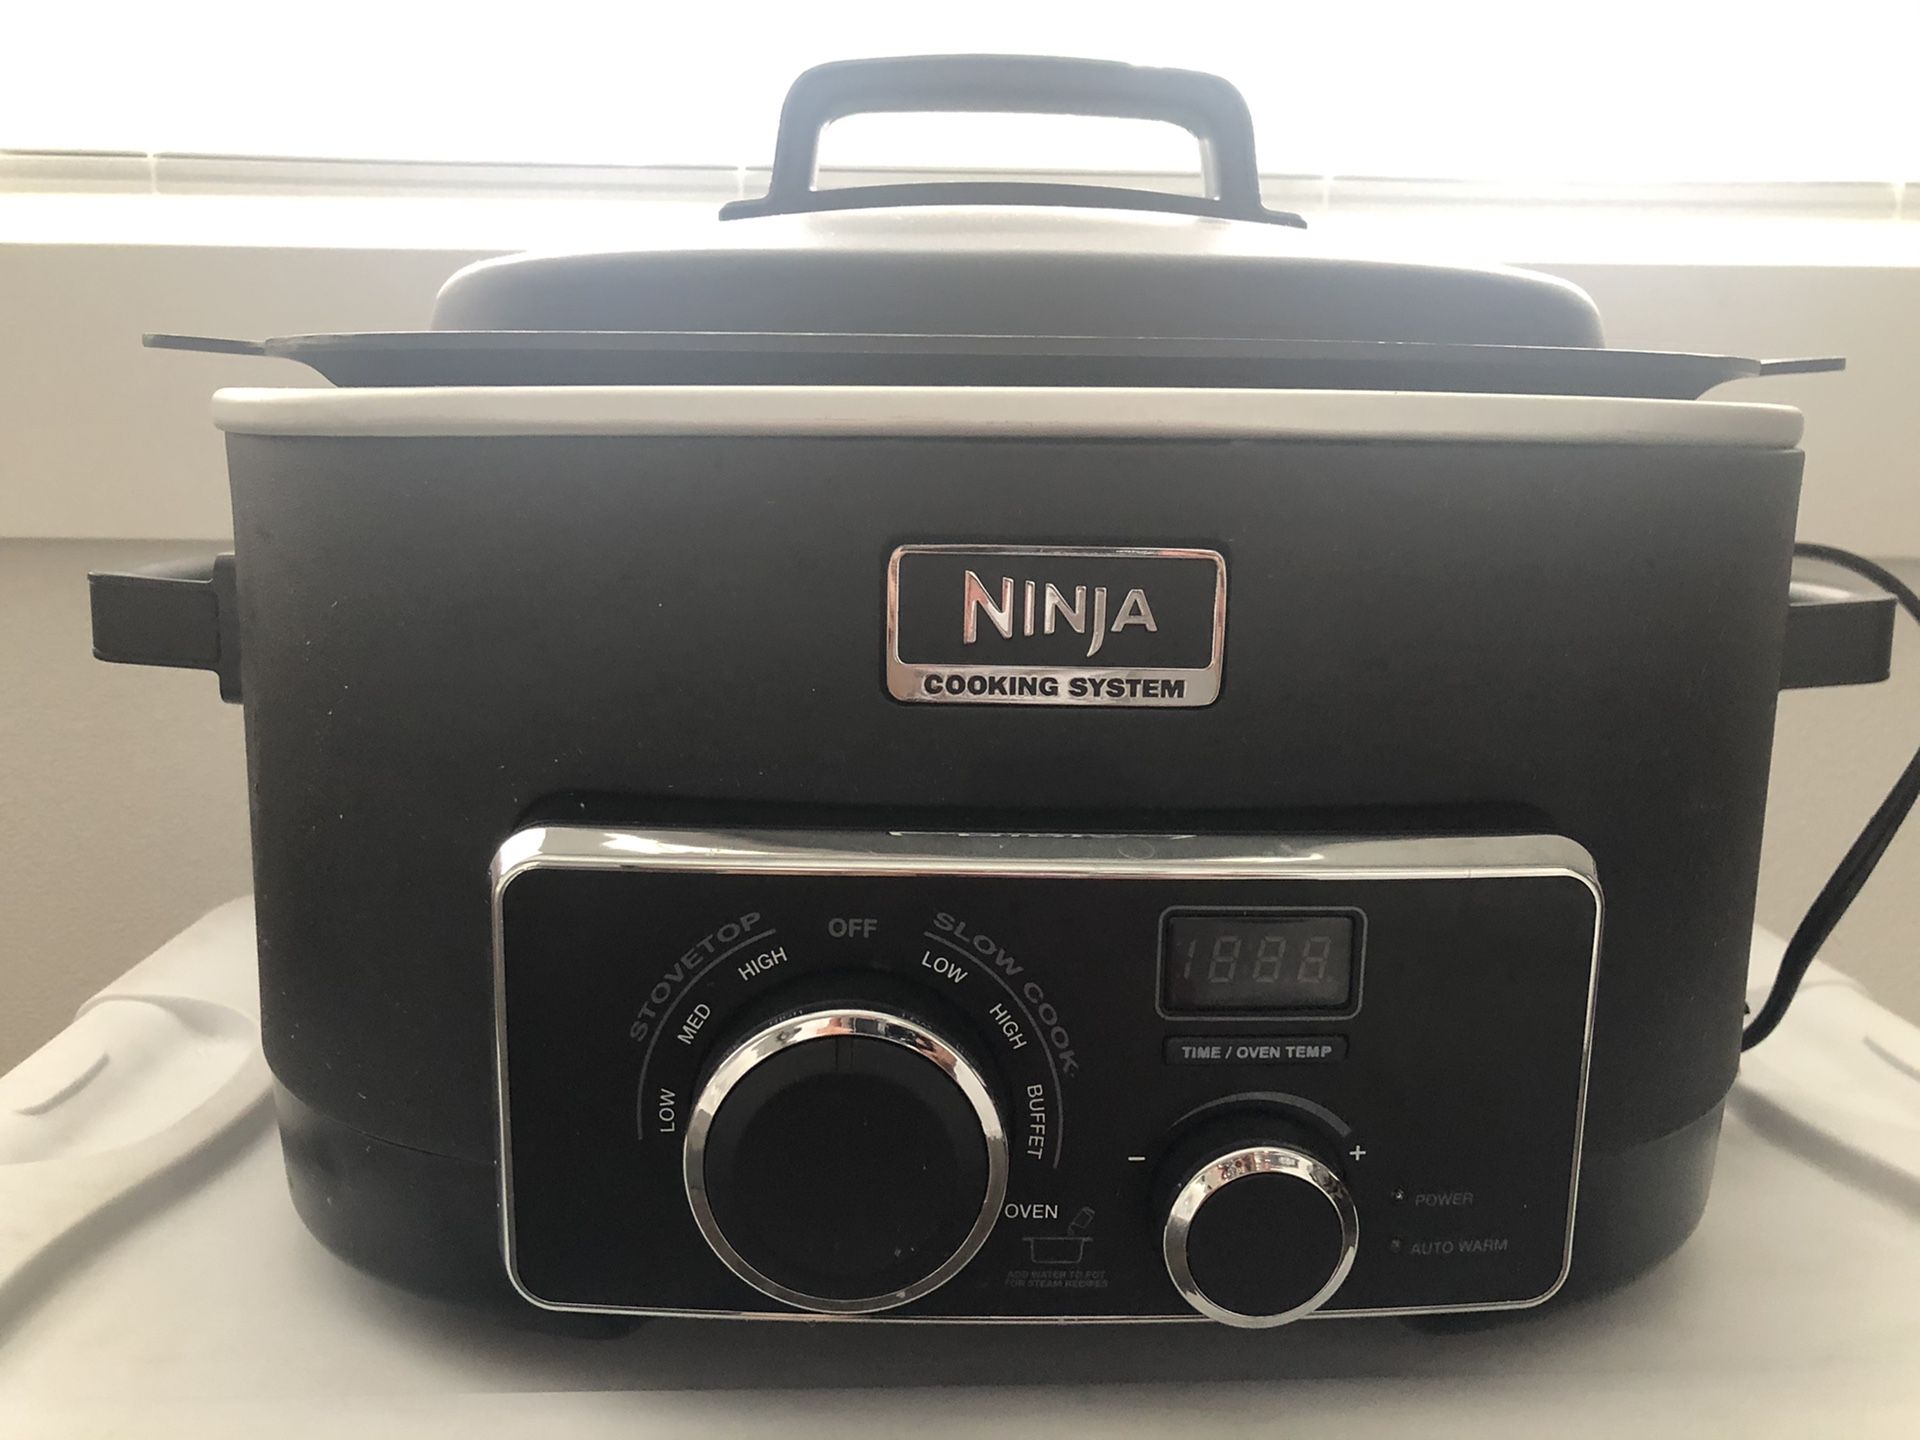 Ninja 3-in1 Cooking System